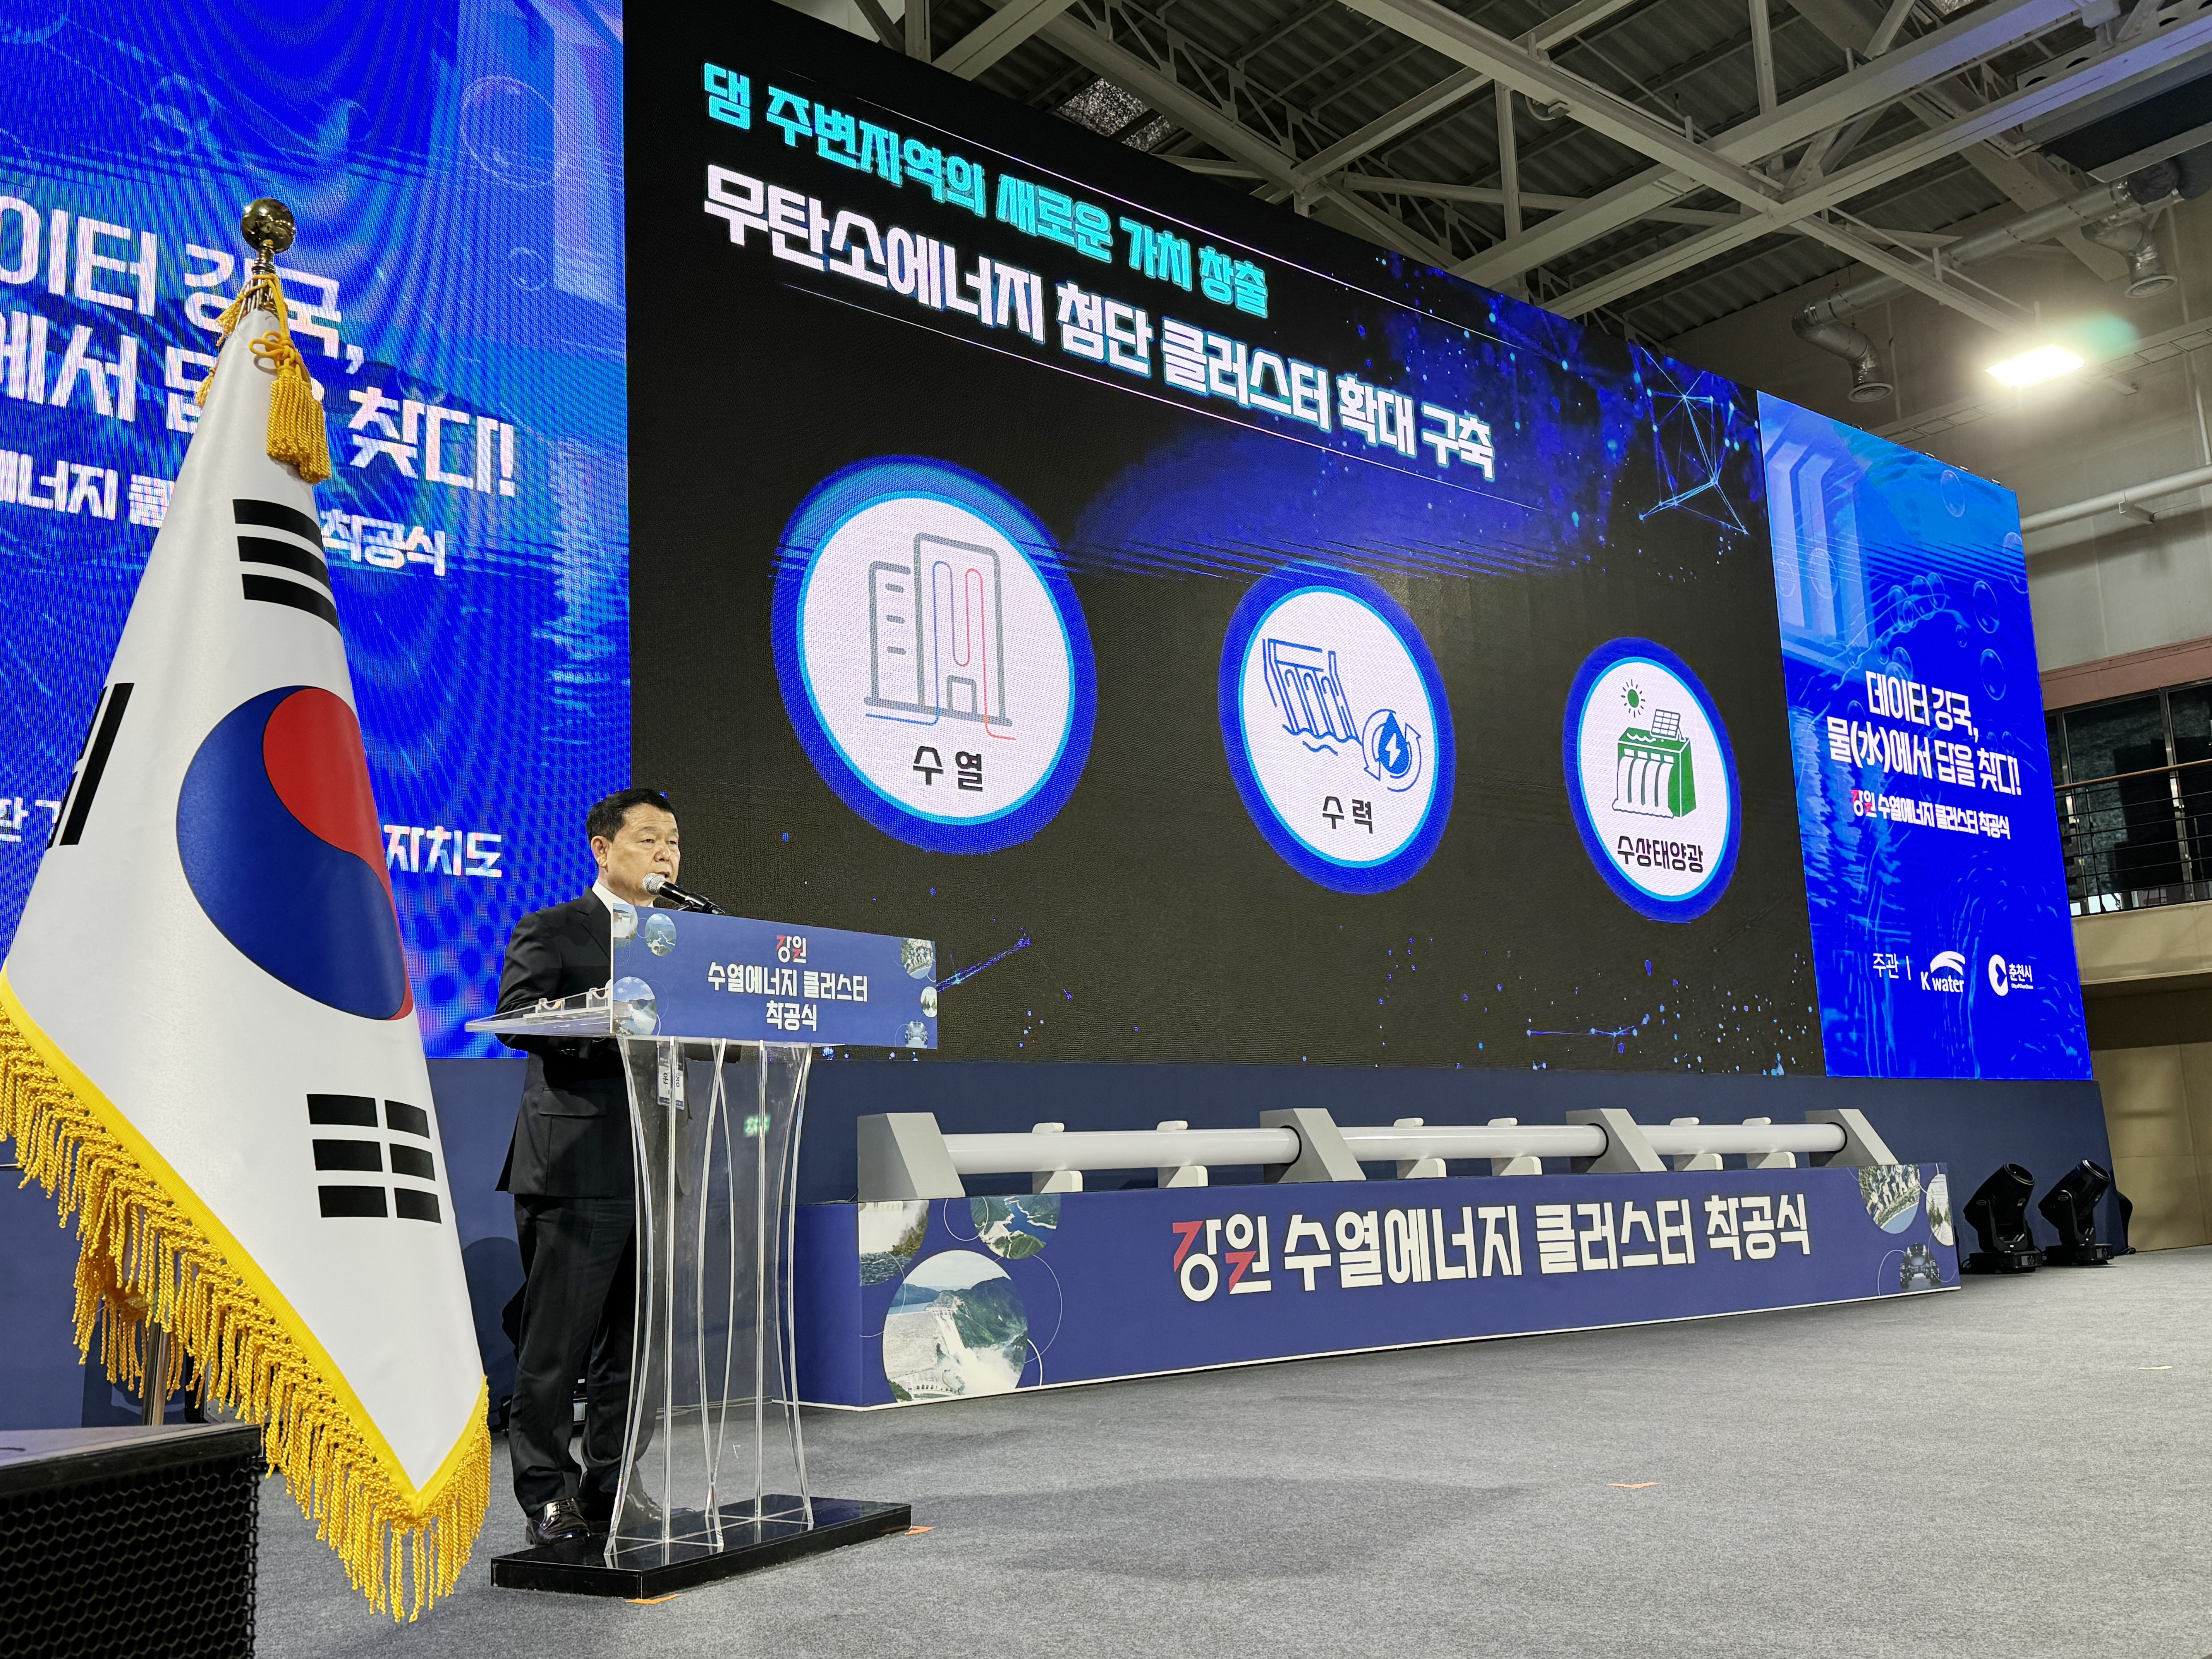  Ceremony for Gangwon Hydrothermal energy cluster 